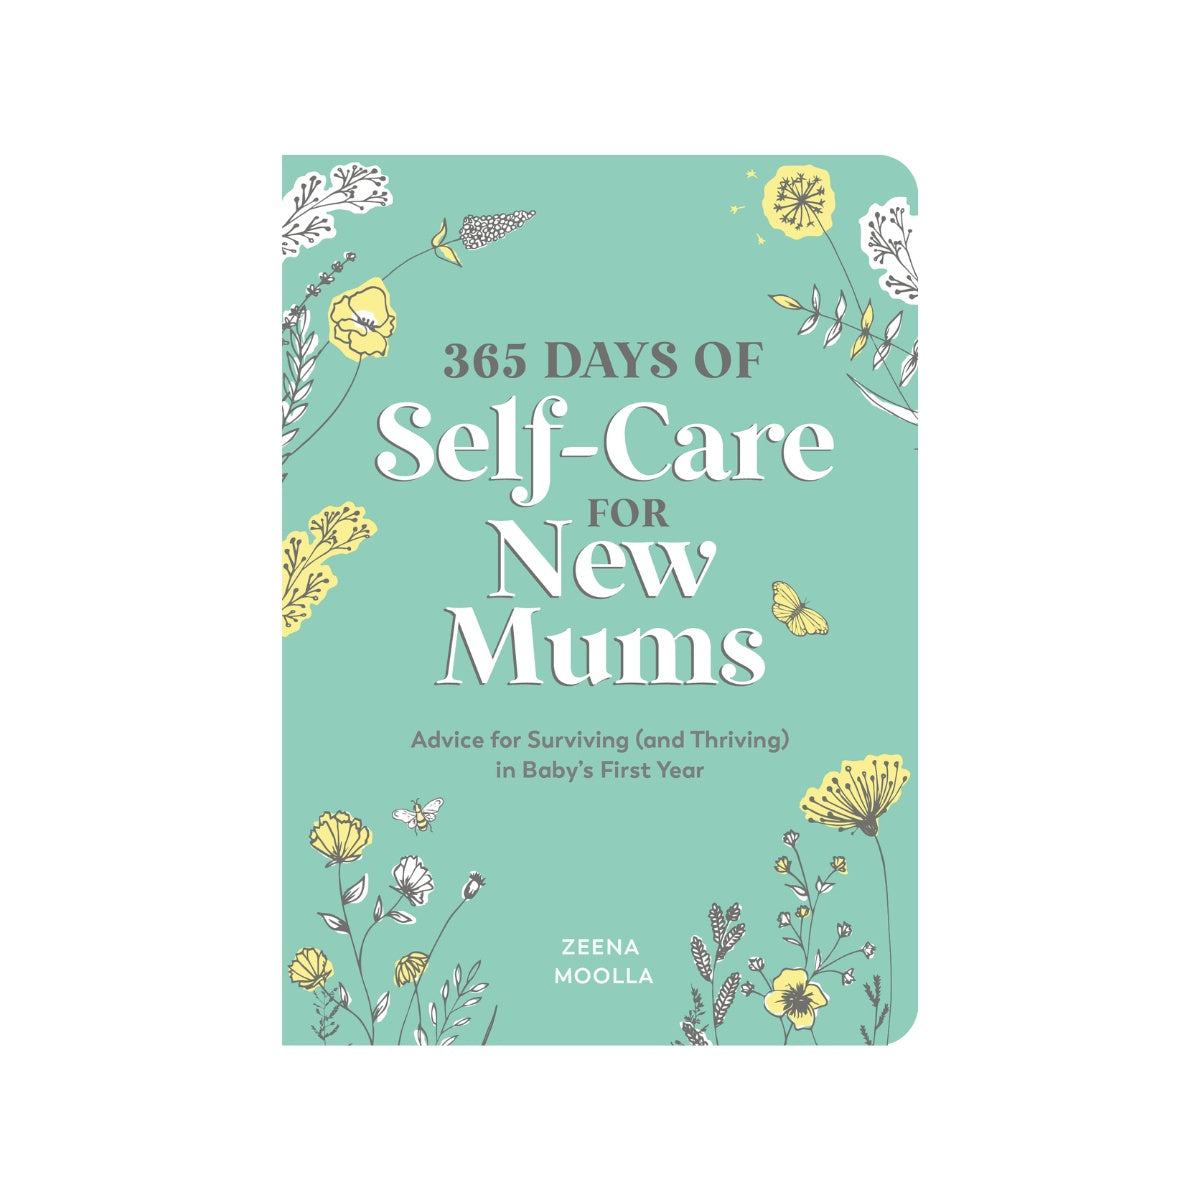 365 Days Of Self-Care For New Mums